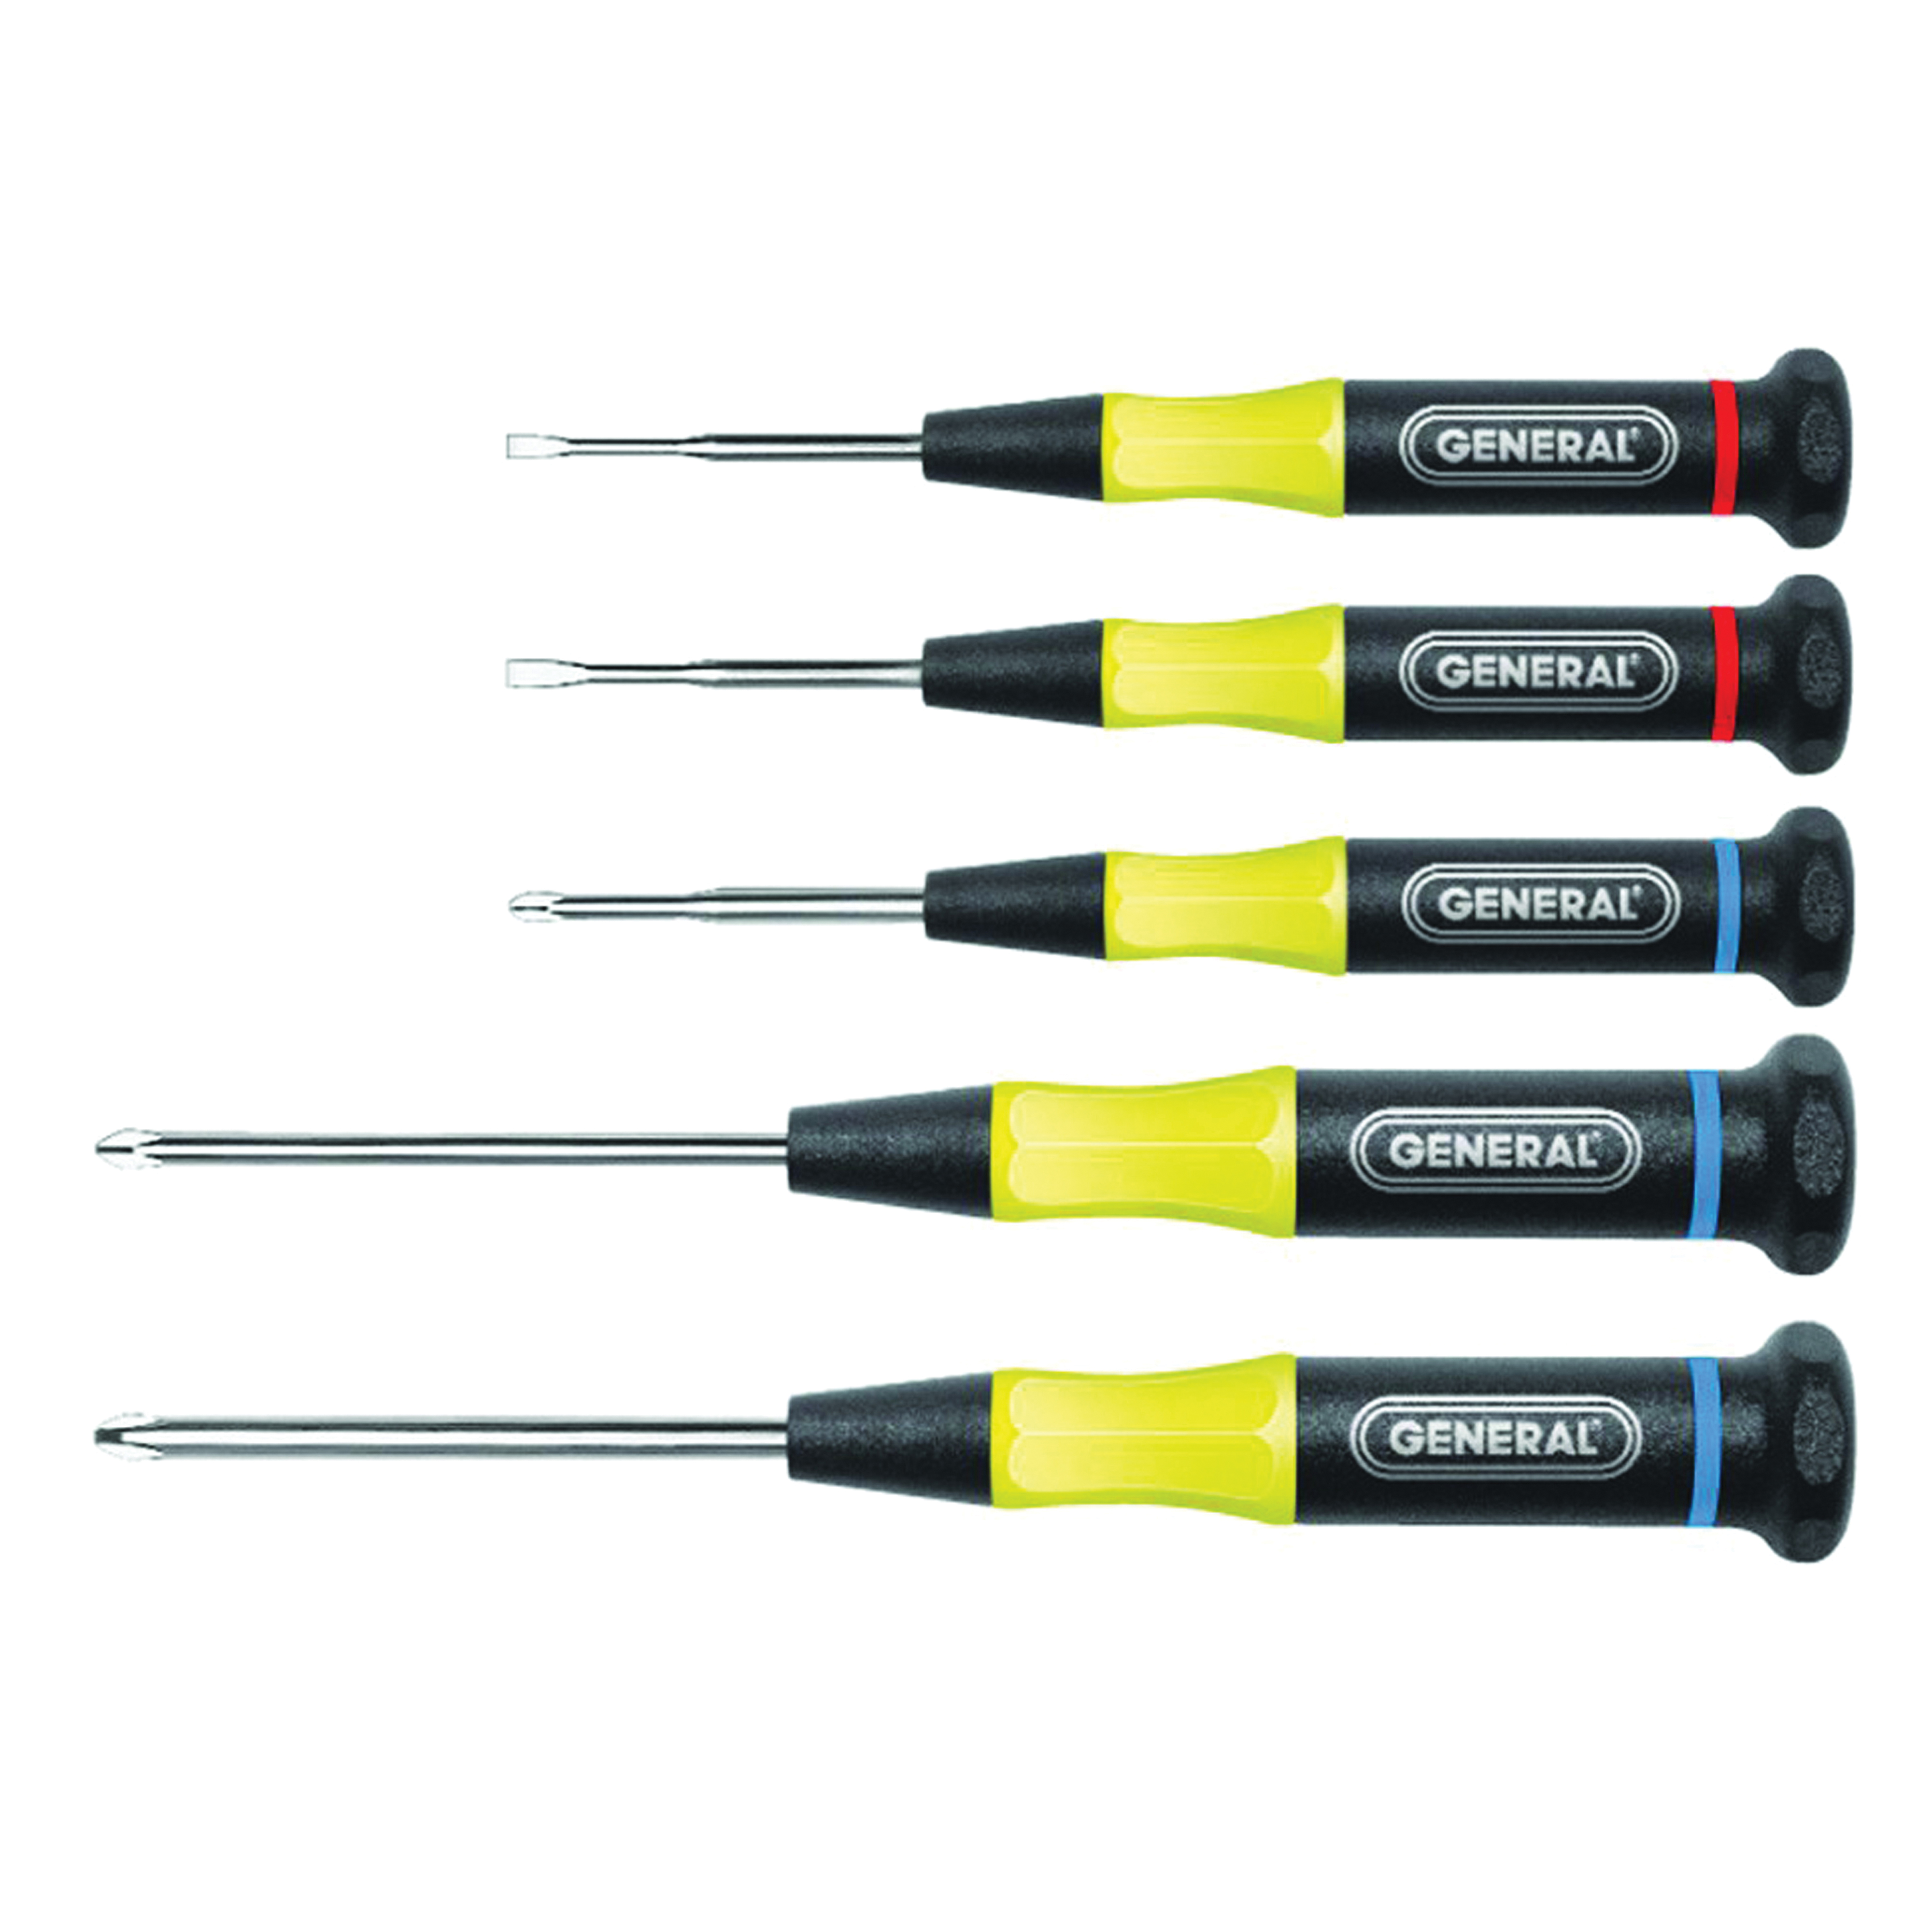 700 Screwdriver Set, Steel, Chrome, Specifications: Round Shank